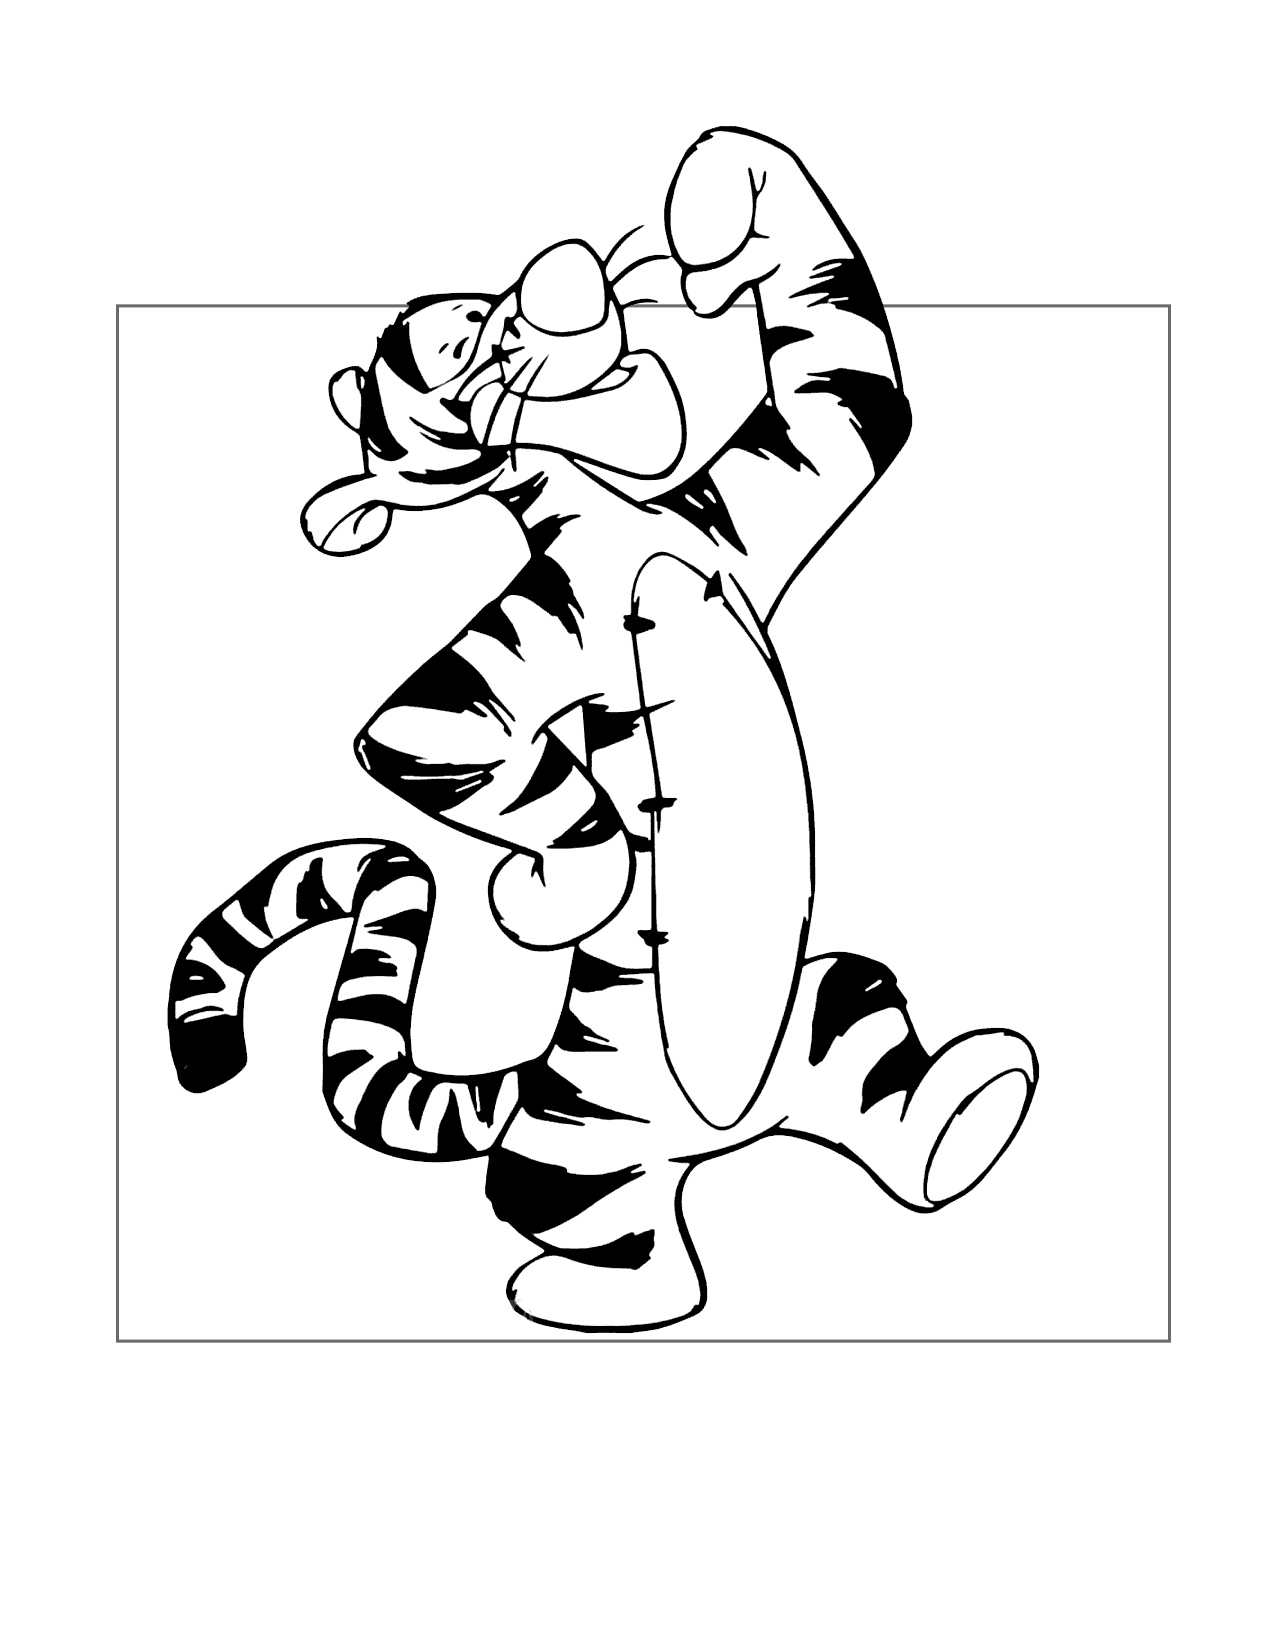 Tiggers The Only One Coloring Page